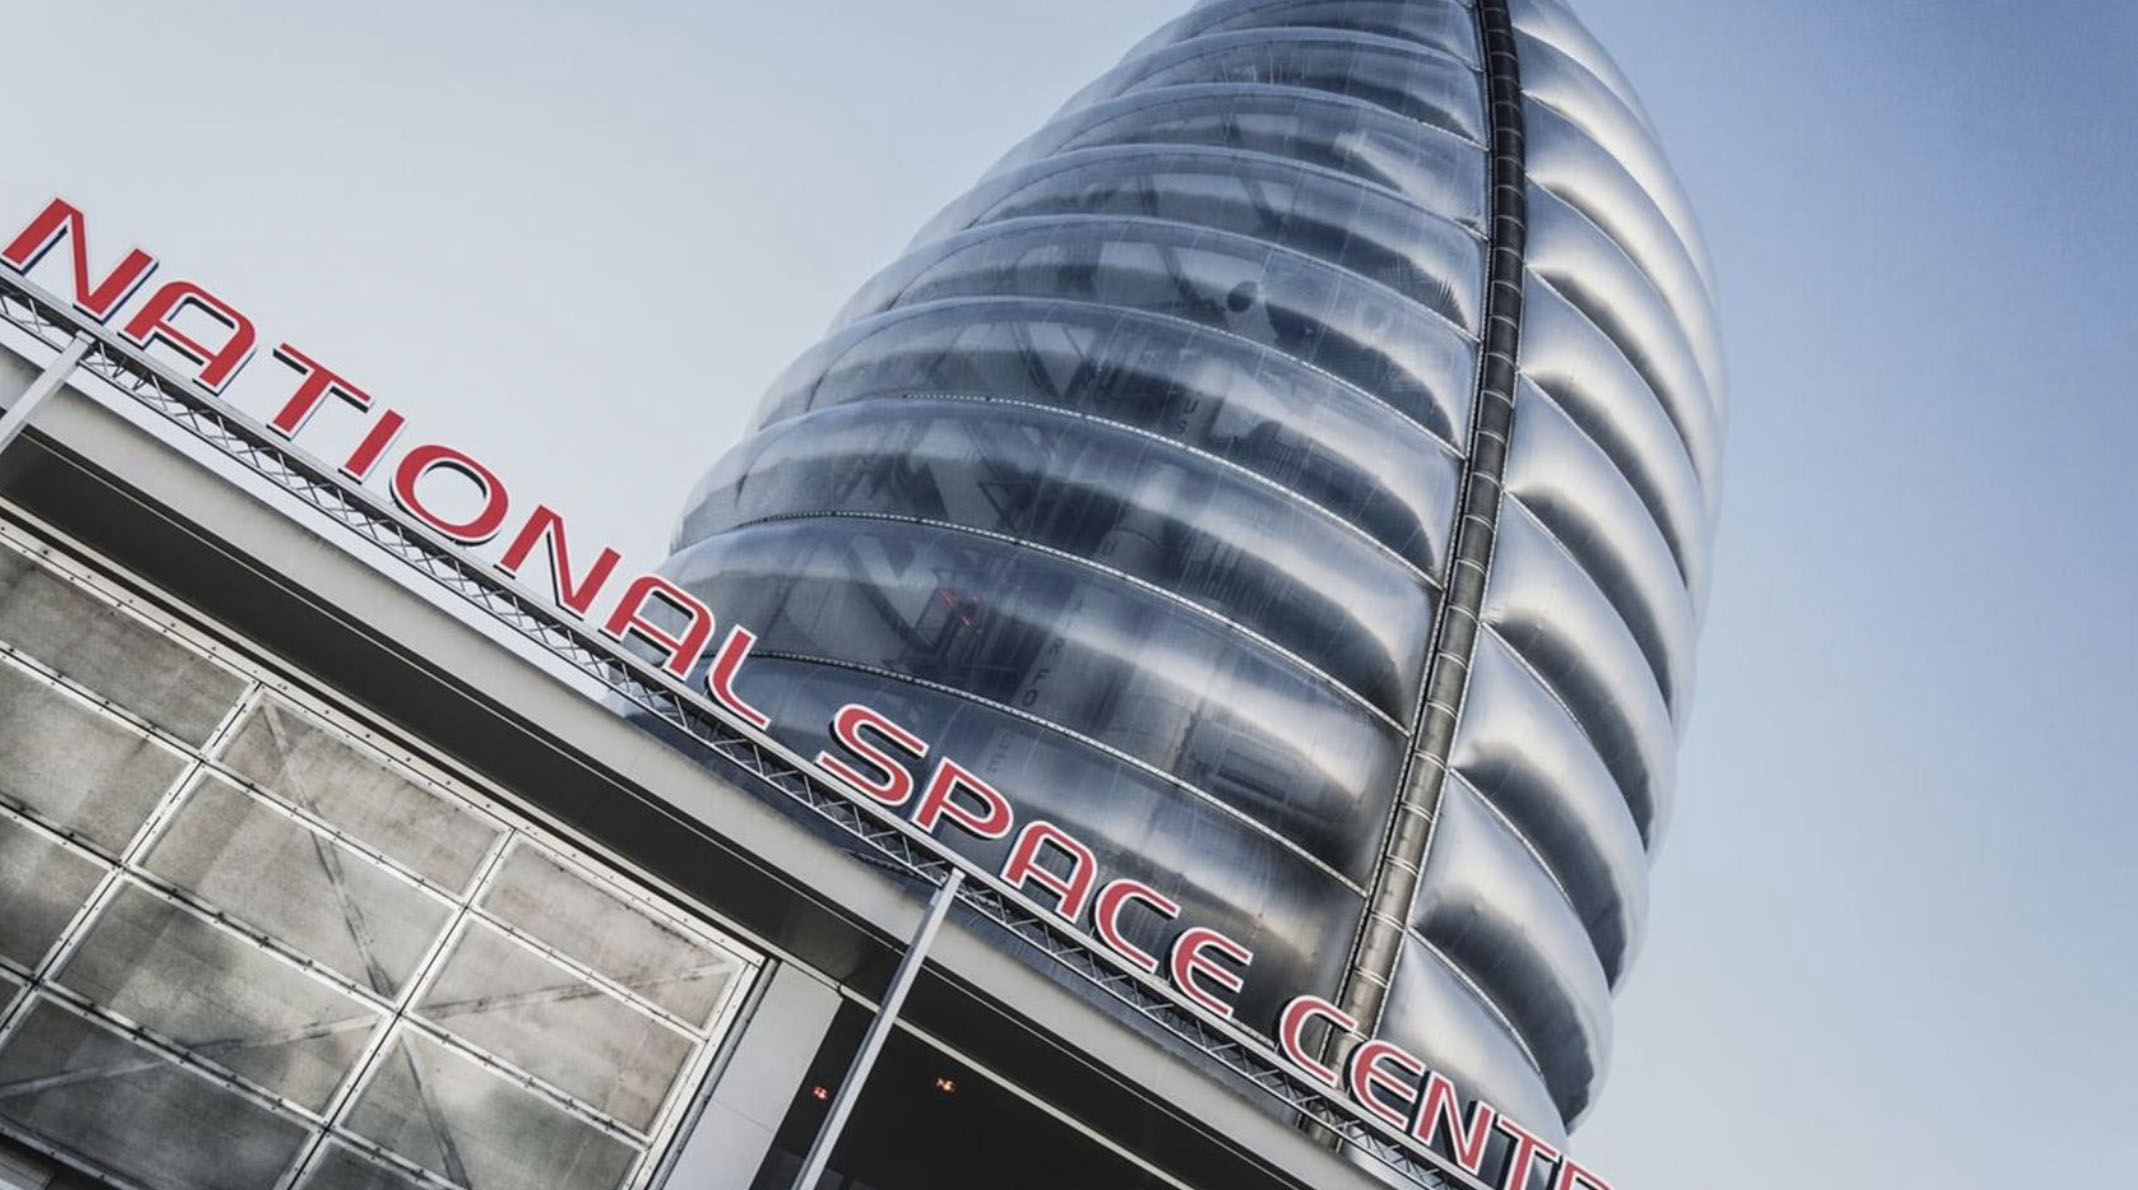 Vision Projects National Space Centre Office Refurb Proposal